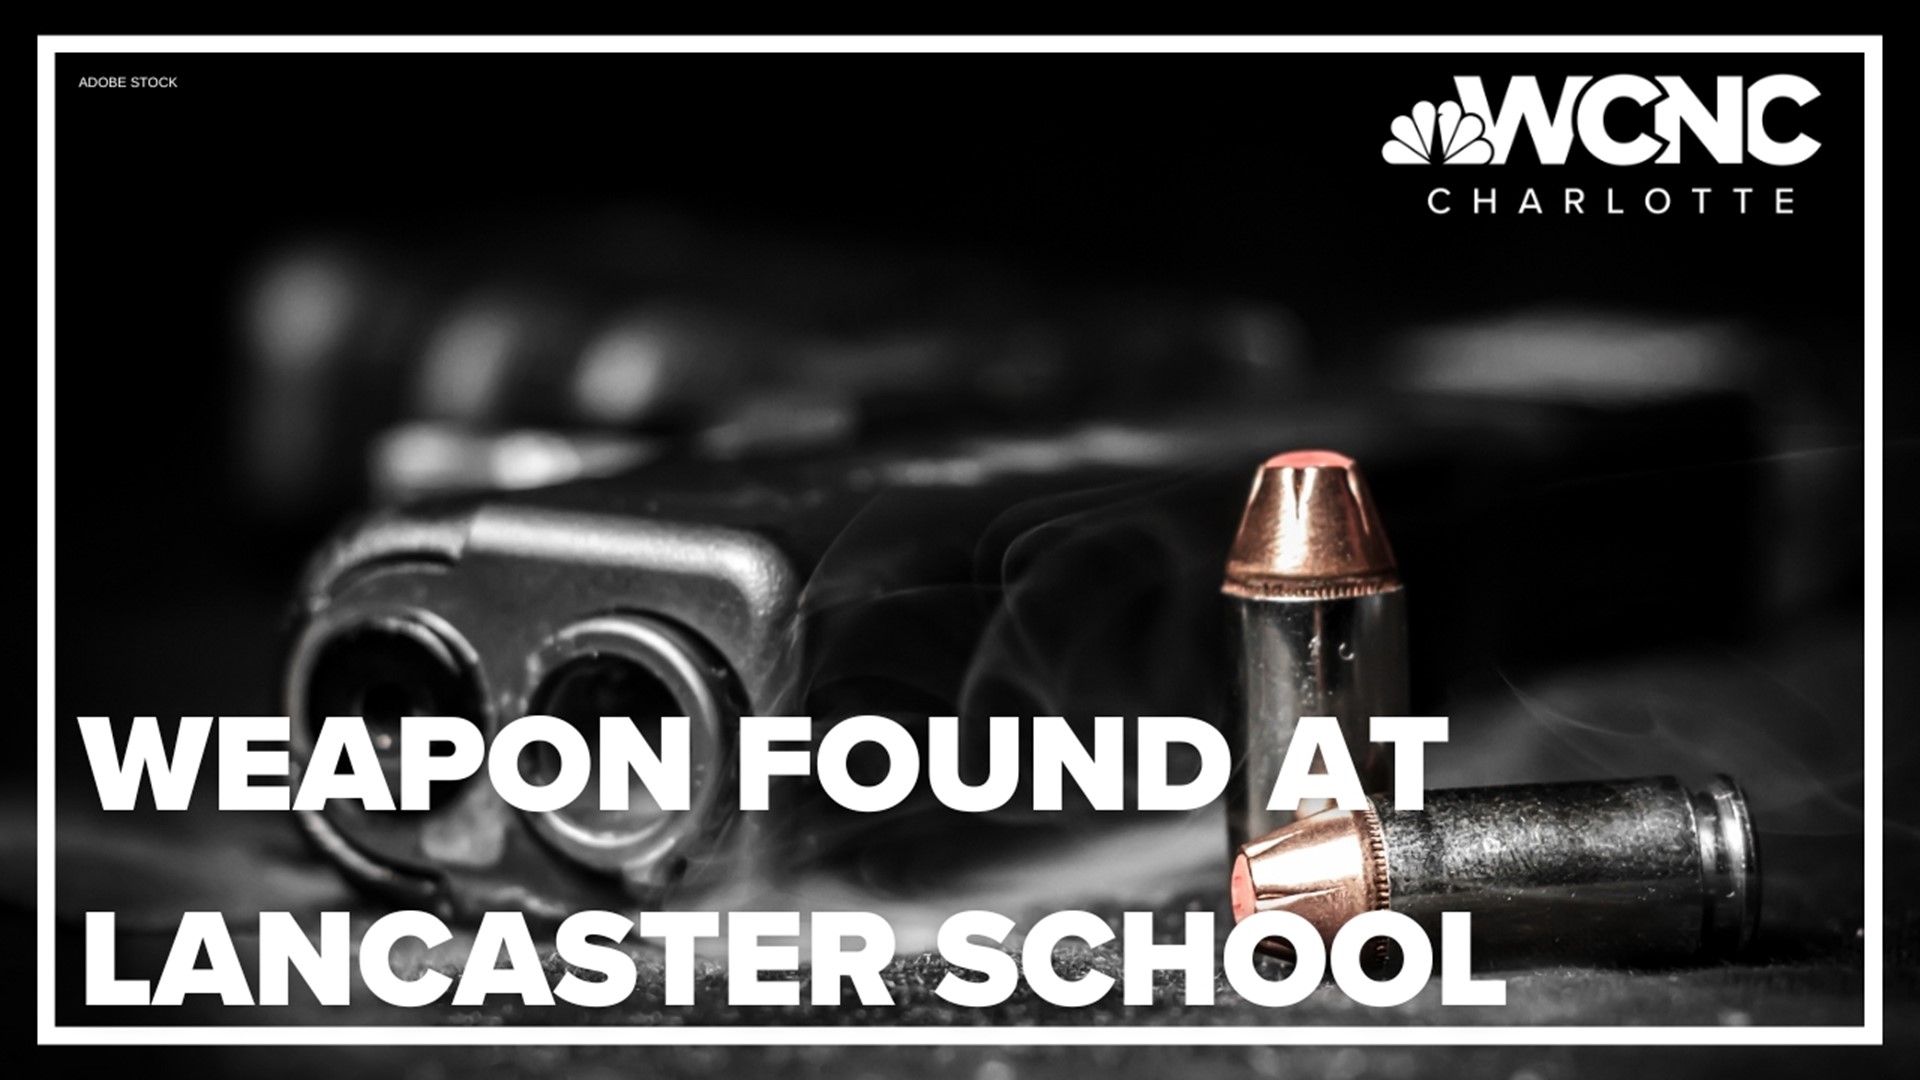 Today, a weapon was found on school grounds in Lancaster.